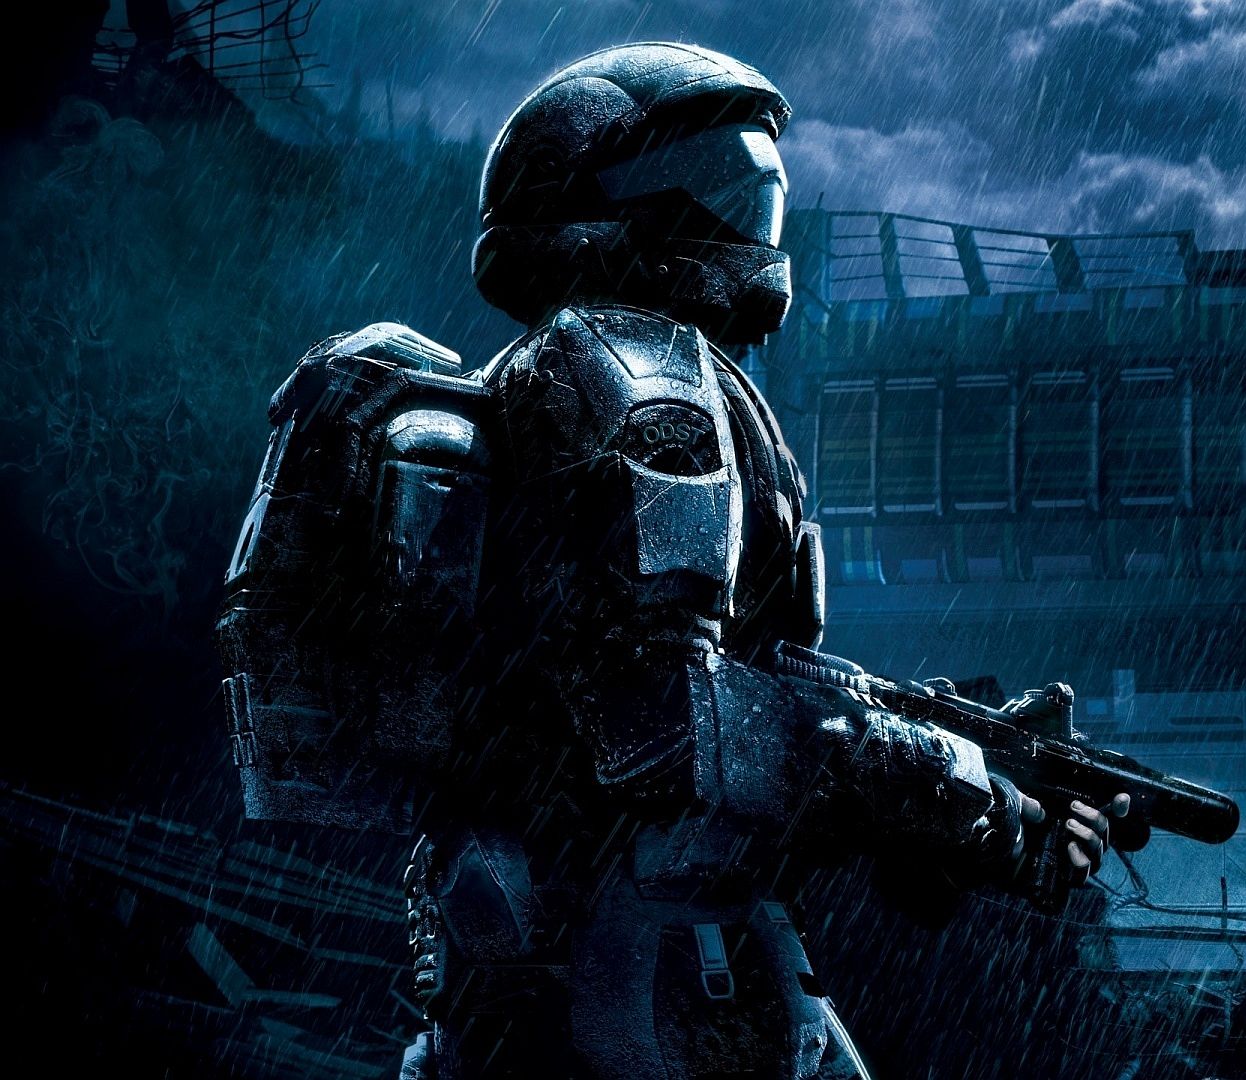 Image for 343 Industries removes police sirens nameplate from Halo 3: ODST, alt-right fans react poorly